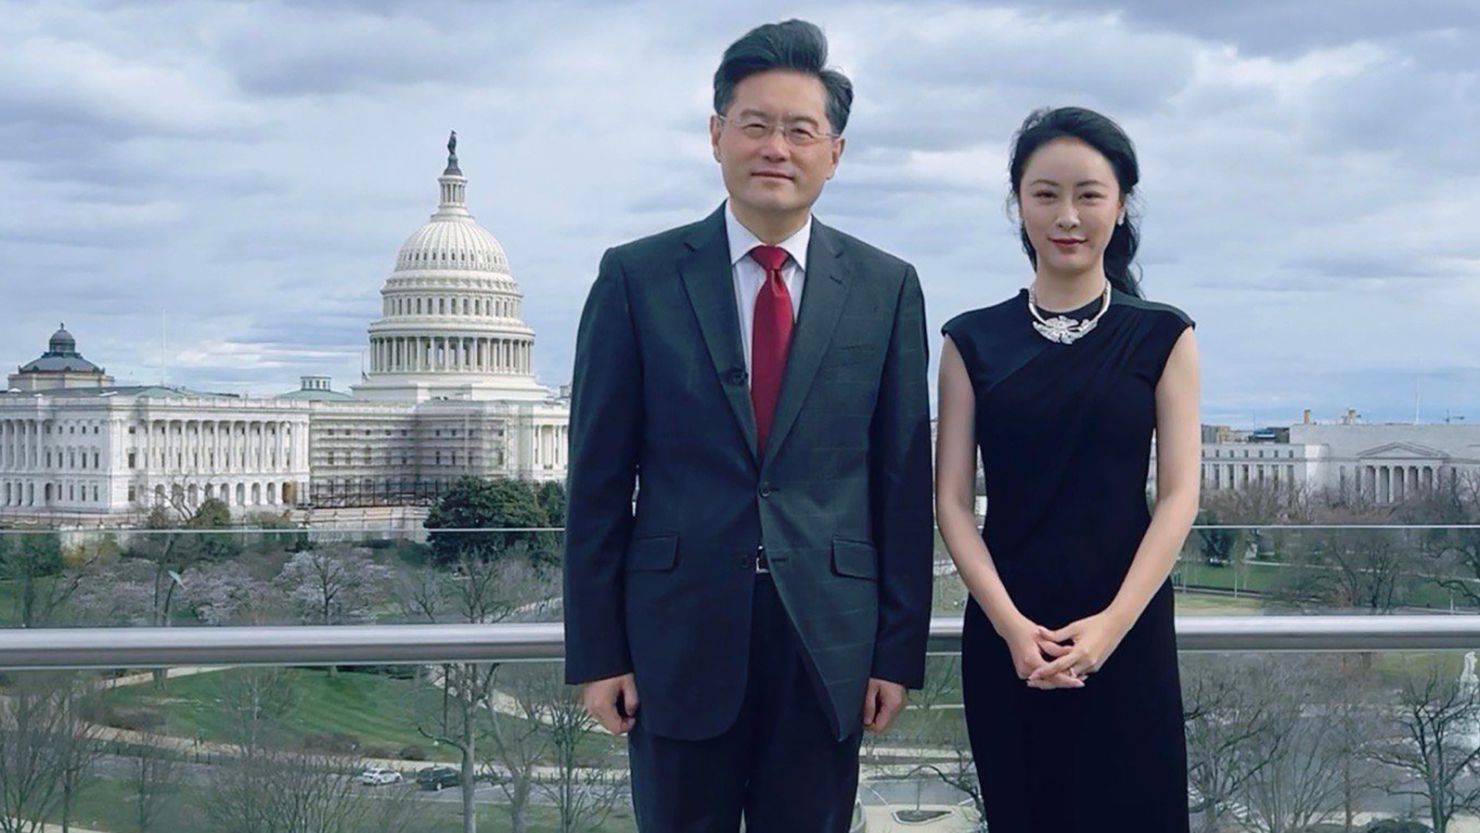 Chinese TV presenter Fu Xiaotian posed for a photo with Qin Gang during an interview in Washington, DC in March 2022, when Qin served as China's ambassador to the US.